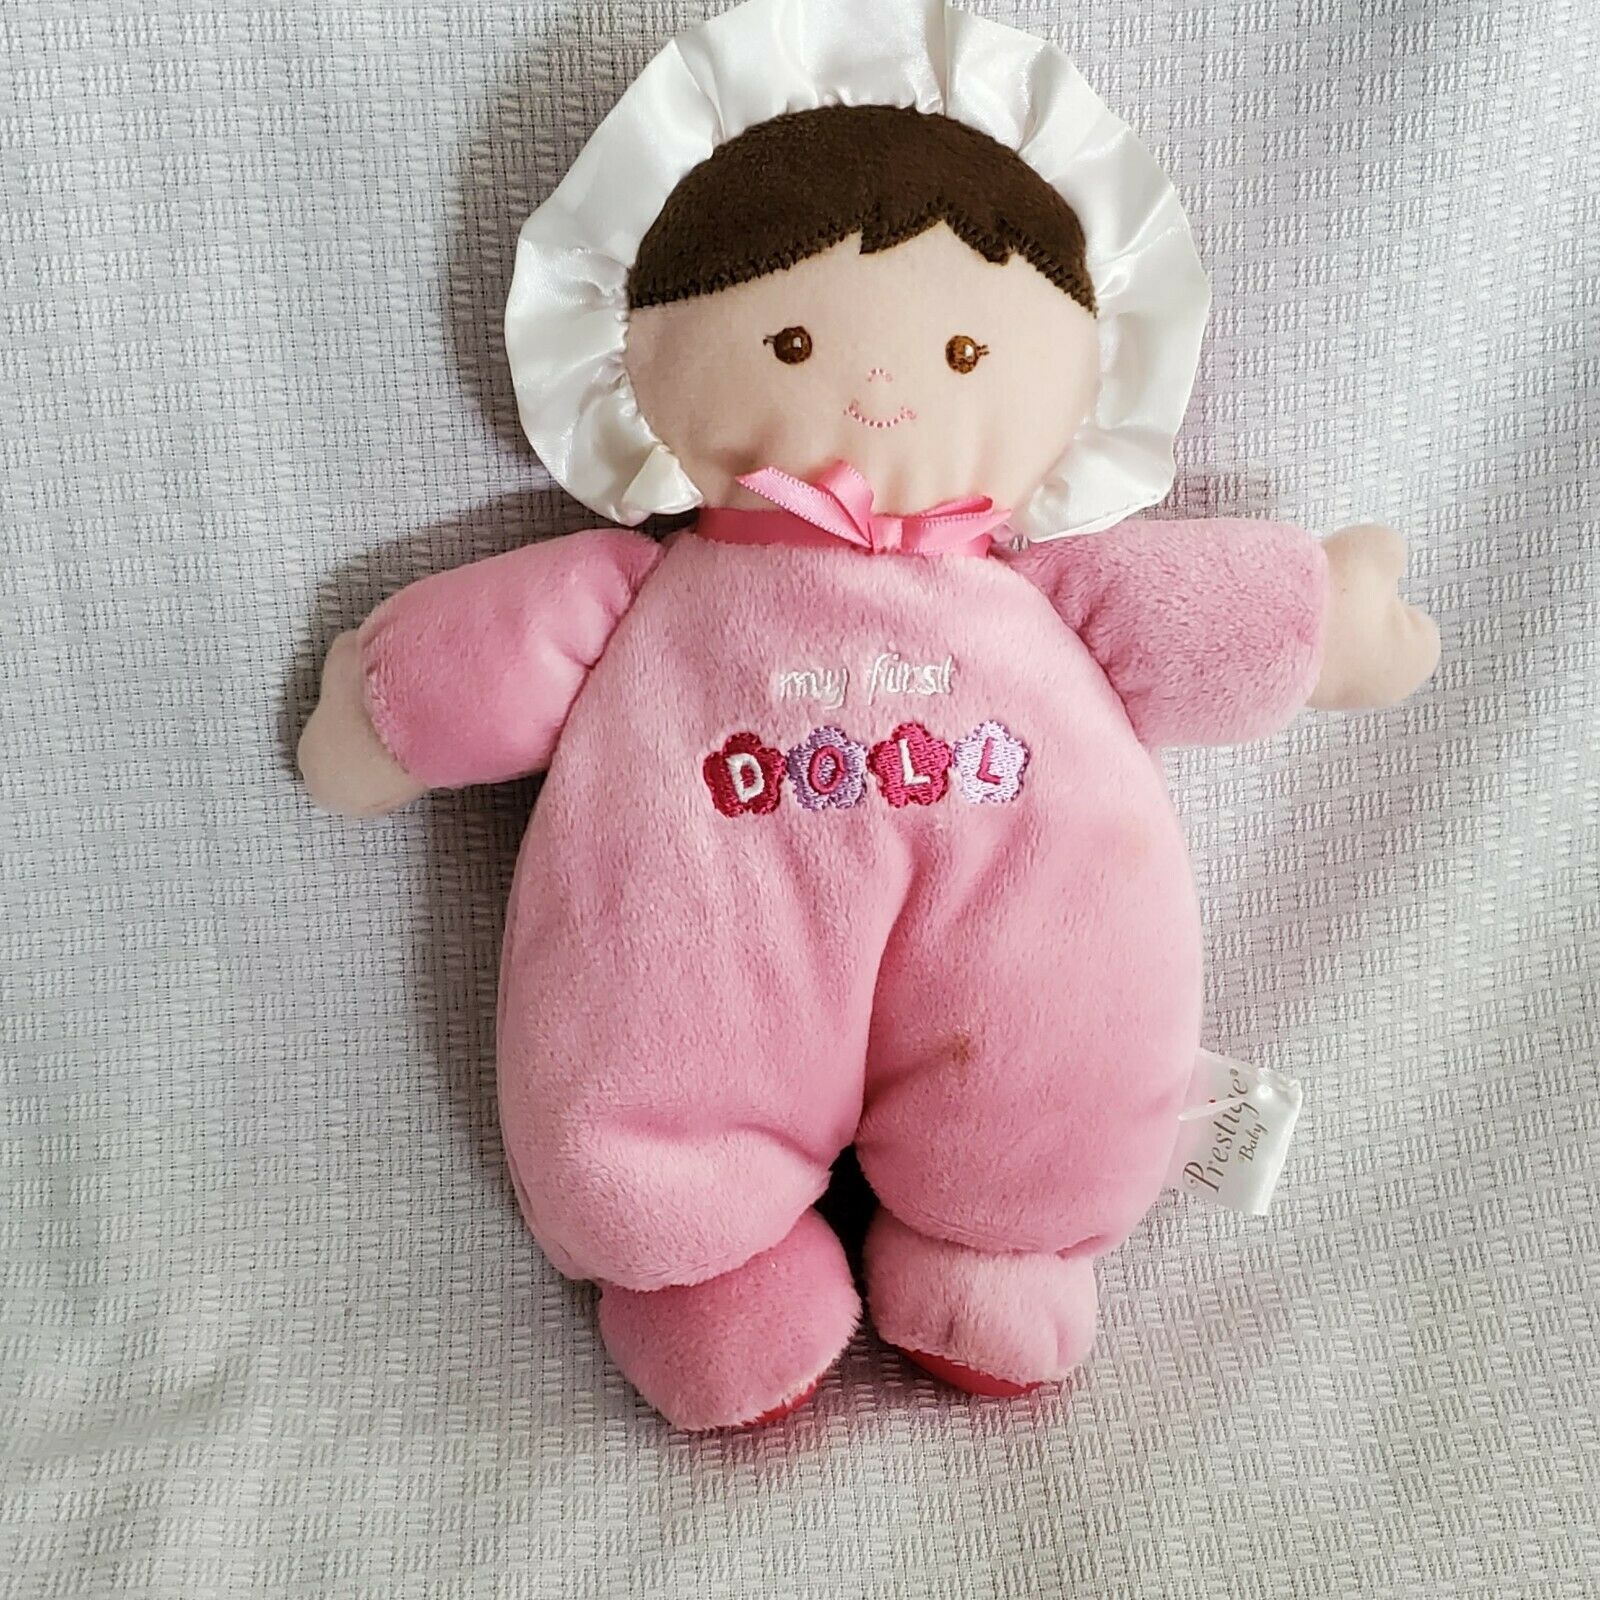 Prestige My First Doll Rattle Plush Pink Brown Hair Baby Toy Girls 9" Flowers  - $49.49